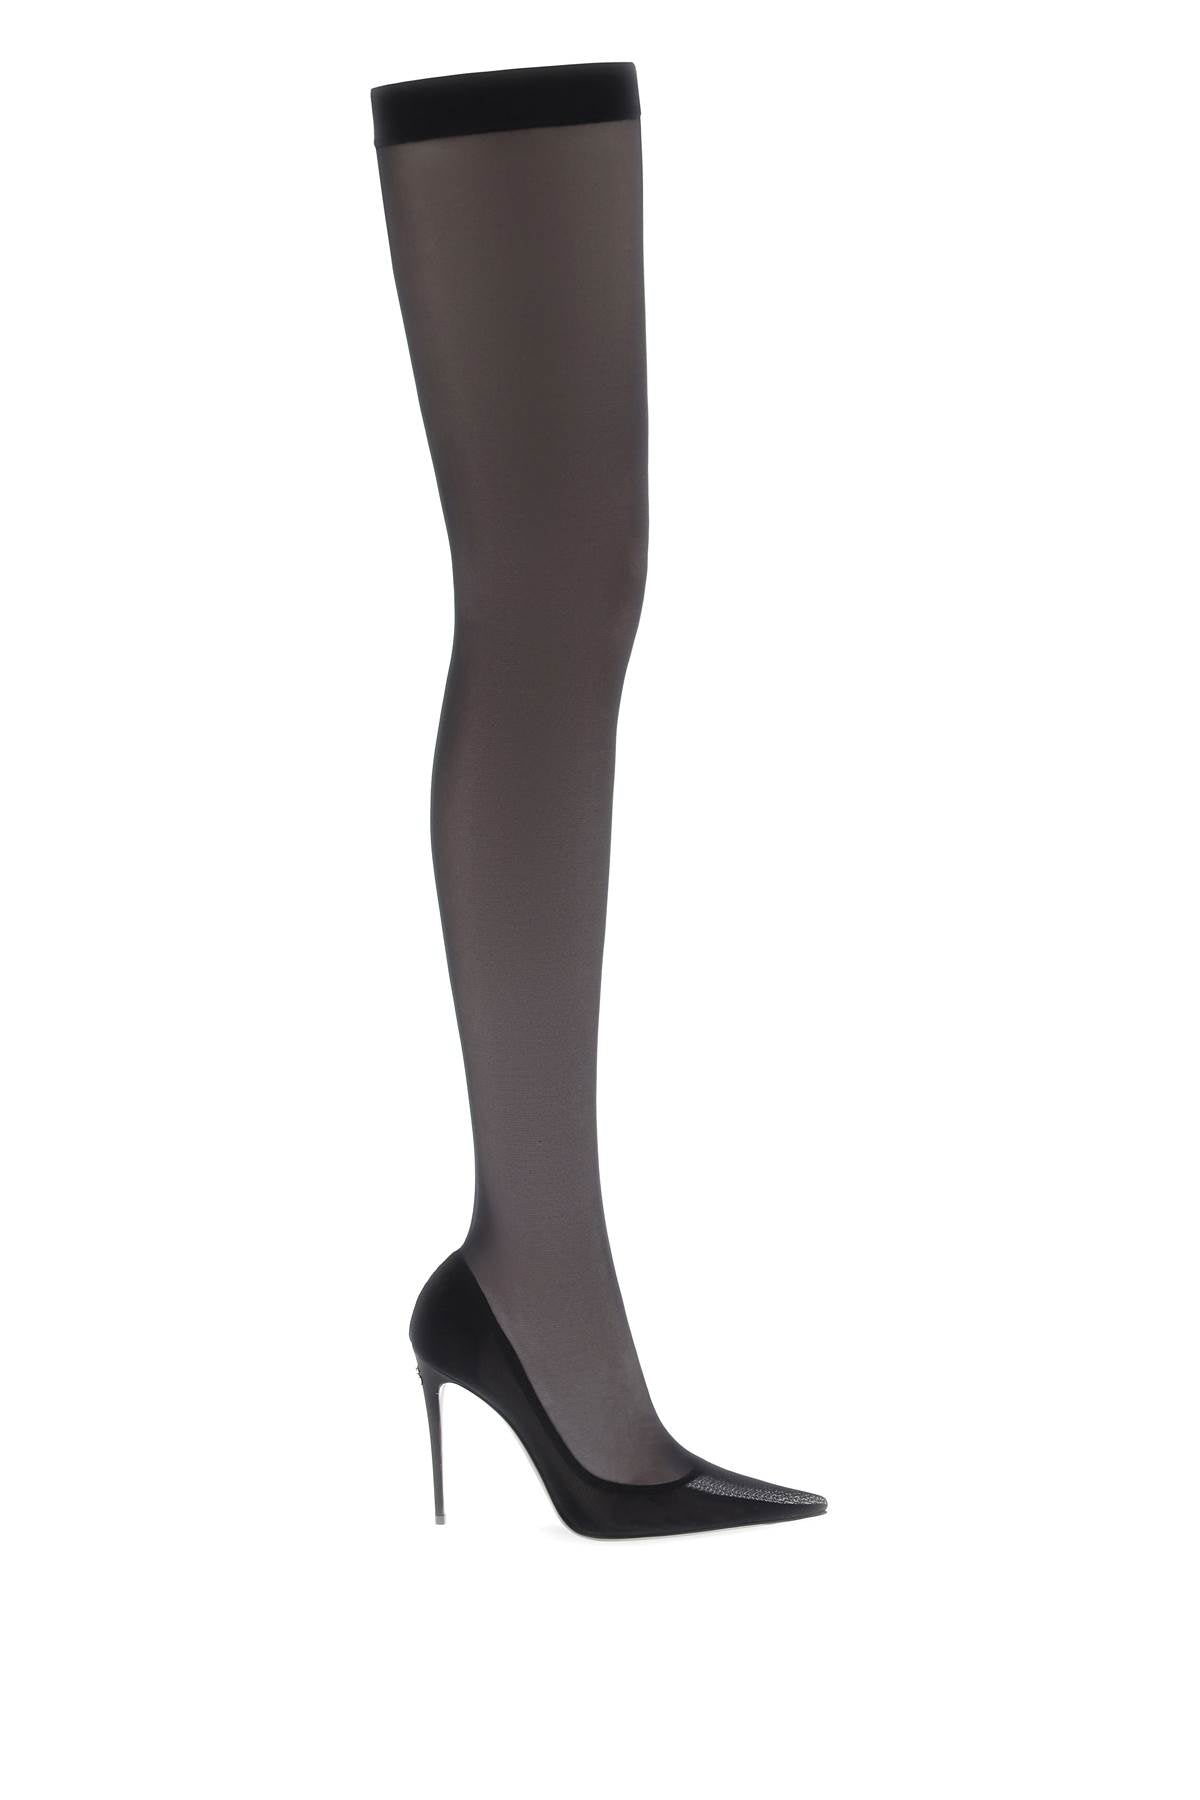 Dolce & gabbana stretch tulle thigh-high boots-0